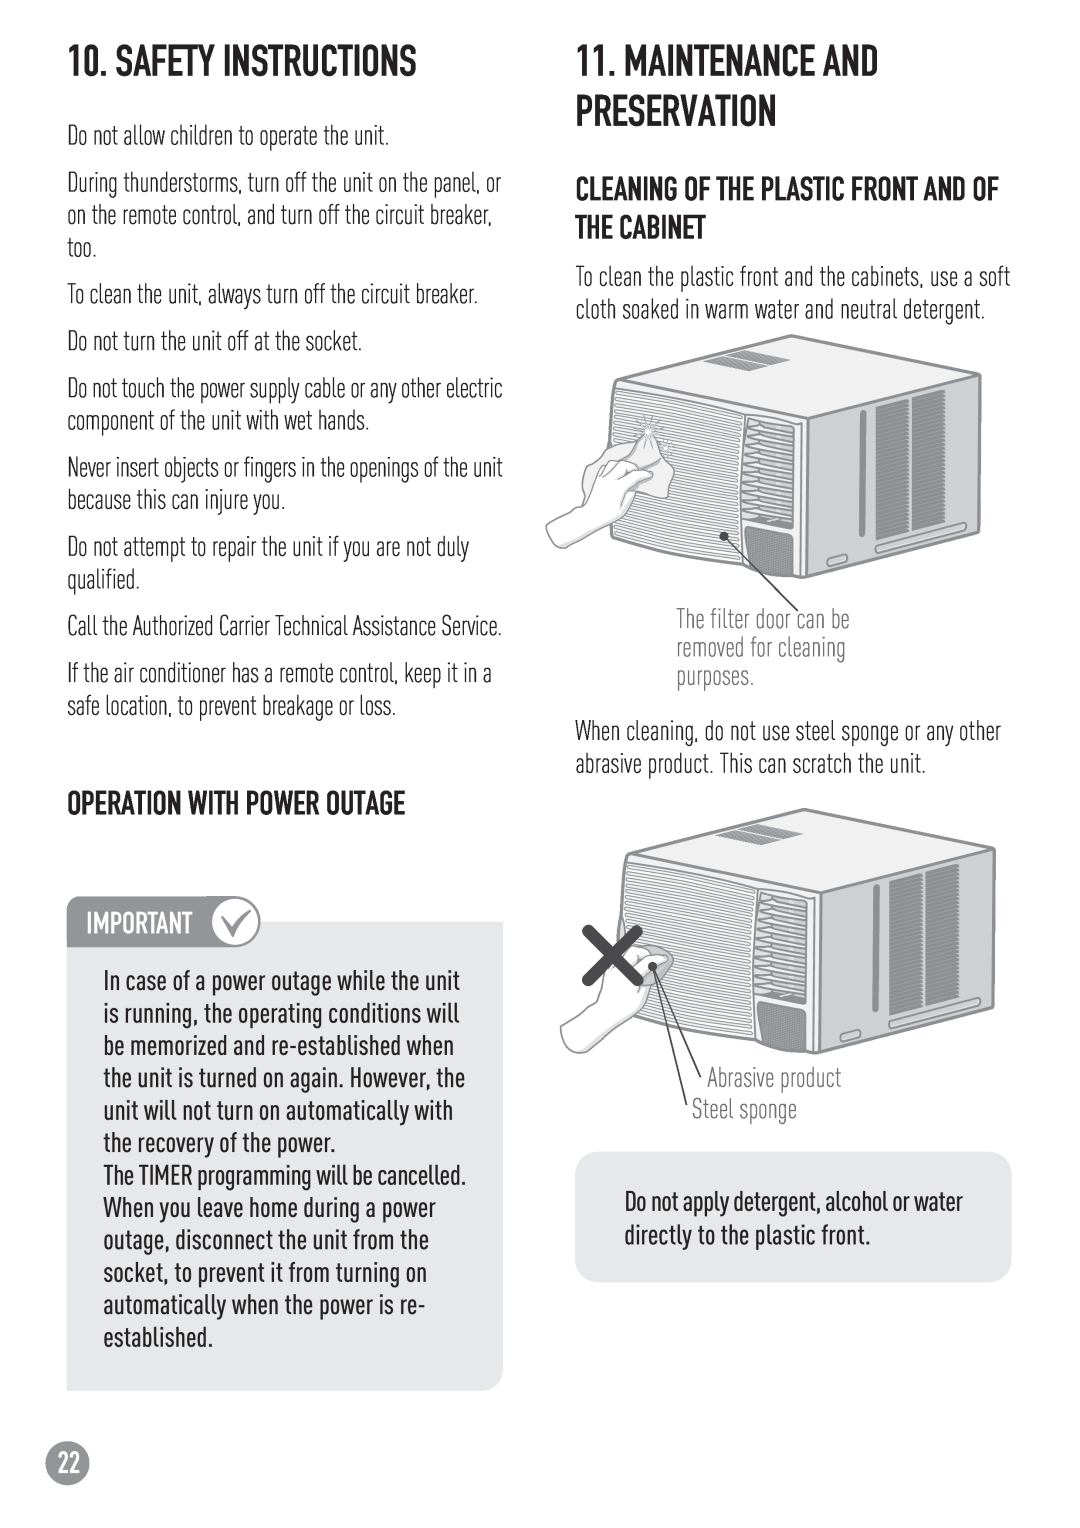 Carrier ZC manual Safety Instructions, Operation With Power Outage, Cleaning Of The Plastic Front And Of The Cabinet 